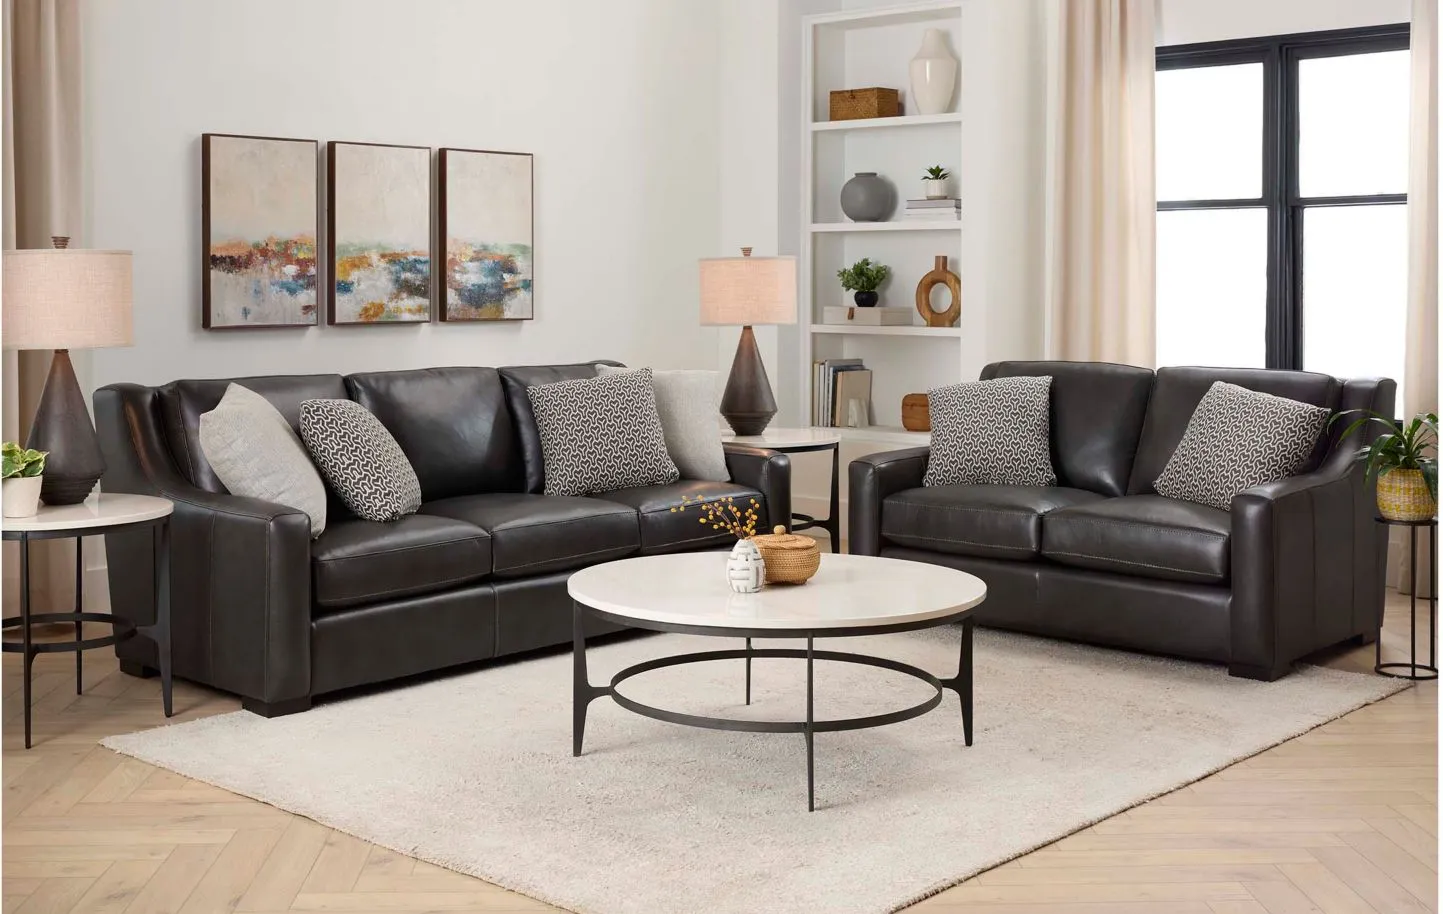 Germain 2-pc. Leather Sofa and Loveseat in Charcoal by Bernhardt